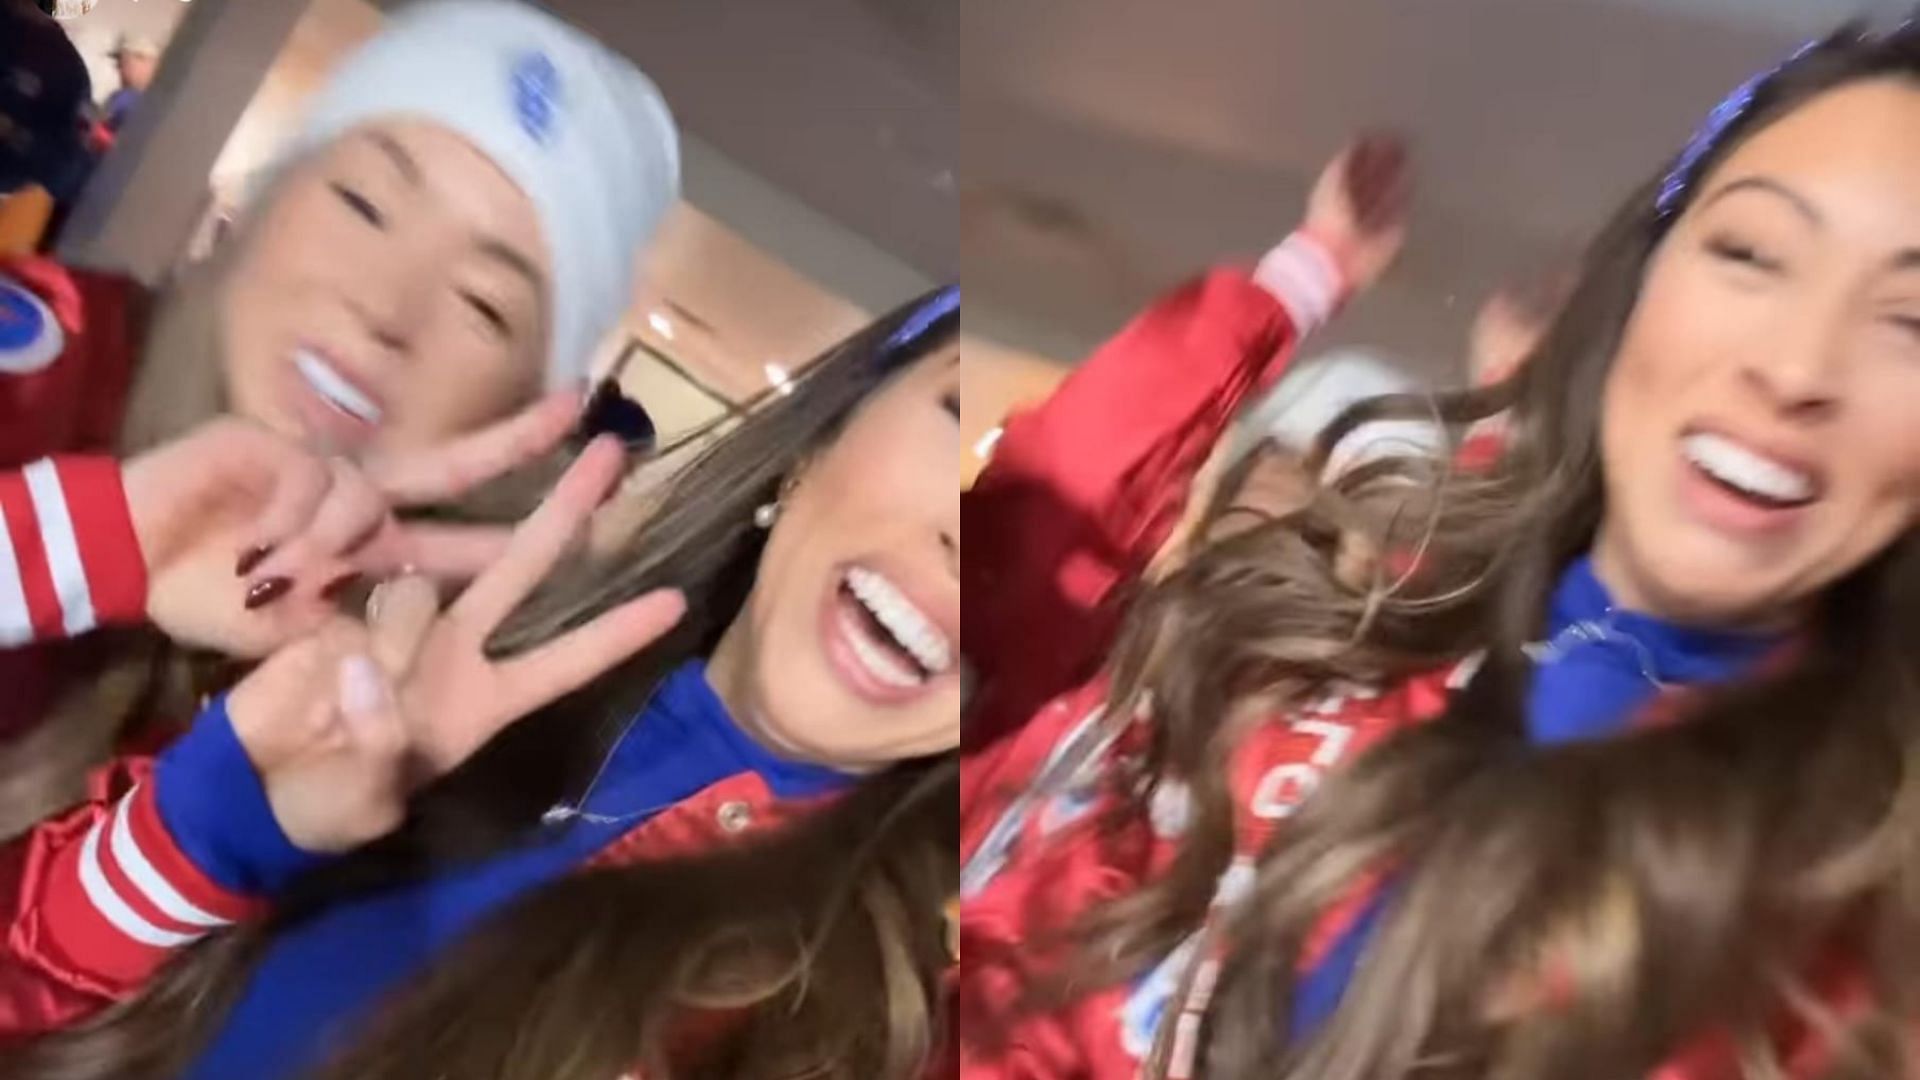 Paige Buechele claimed Hailee Steinfeld tried to start a snowball fight during the Buffalo Bills-Pittsburgh Steelers Wild Card Round game.